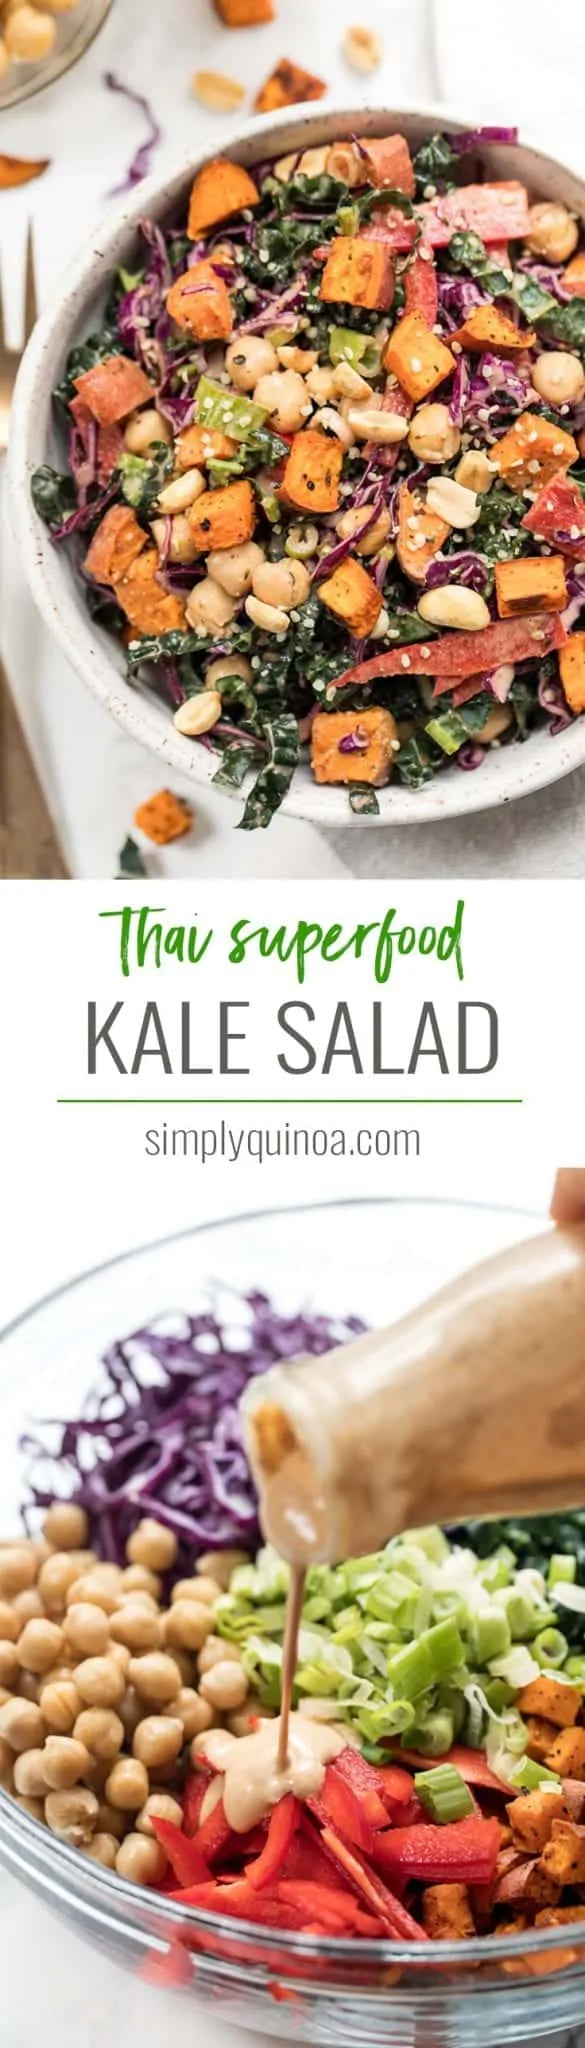 Thai Superfood Kale Salad with Sweet Potatoes - Simply Quinoa